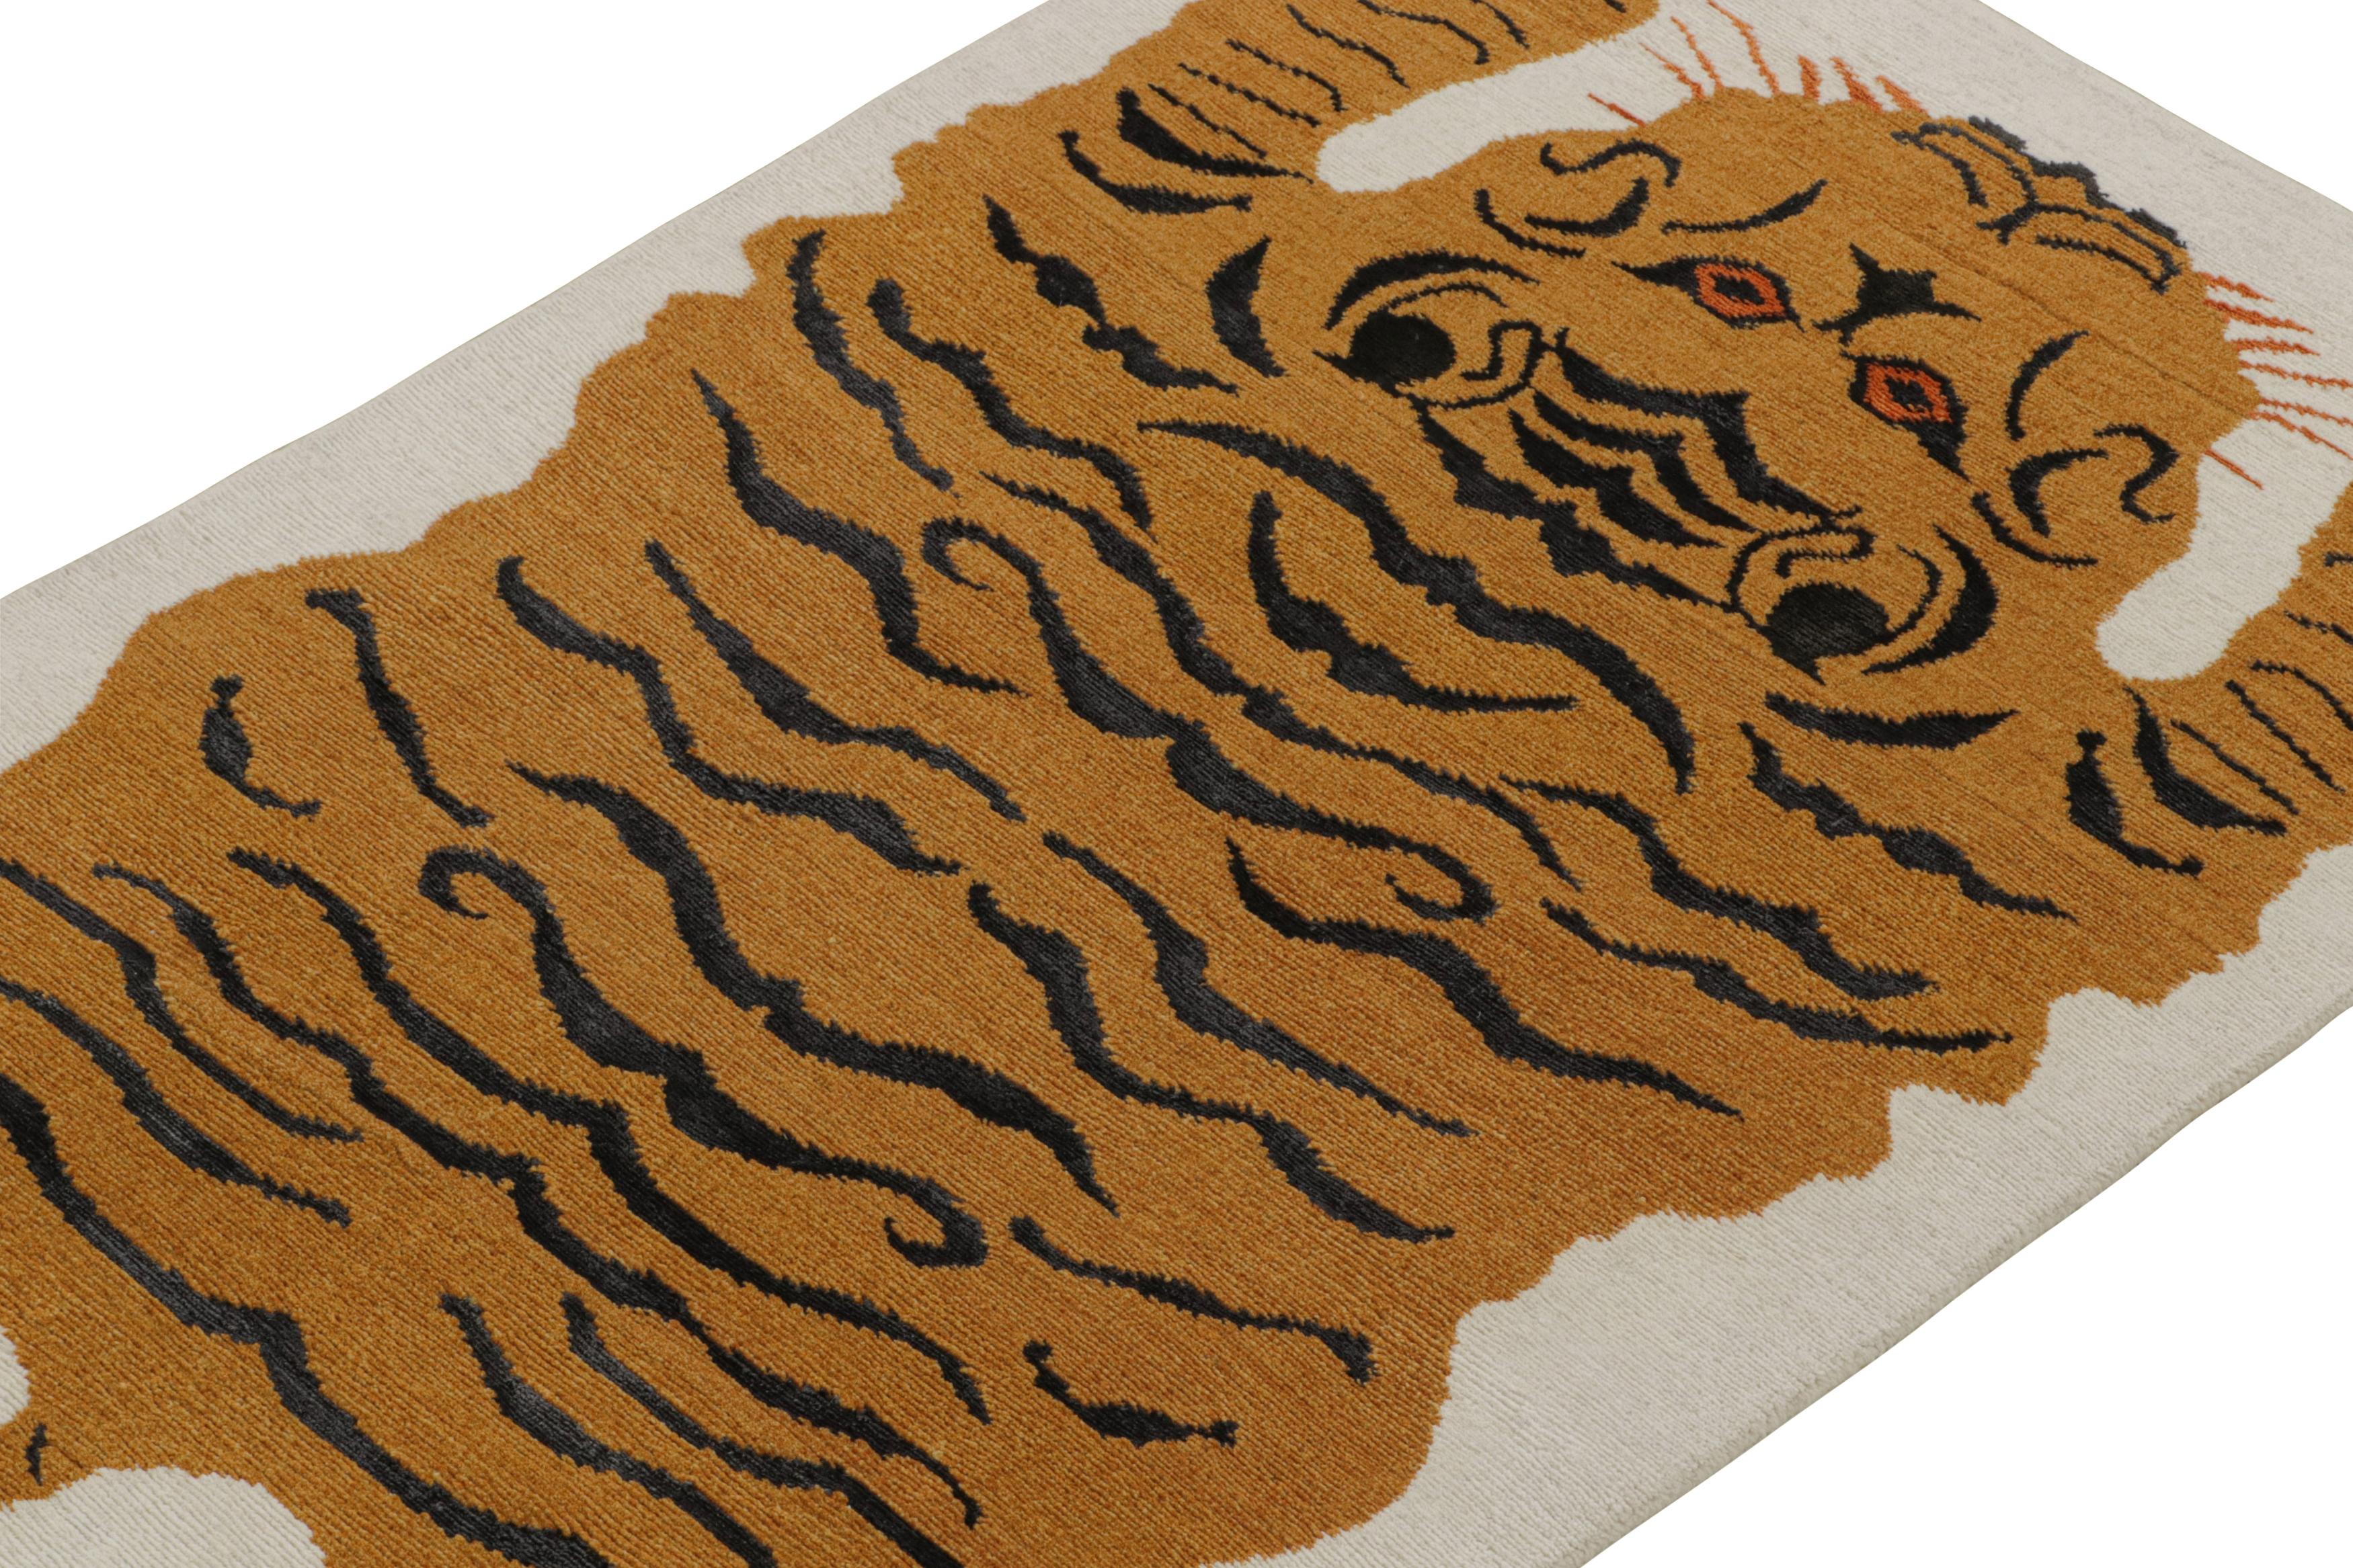 Hand-Knotted Rug & Kilim’s Tiger-Skin Rug in White with Gold & Black Pictorial